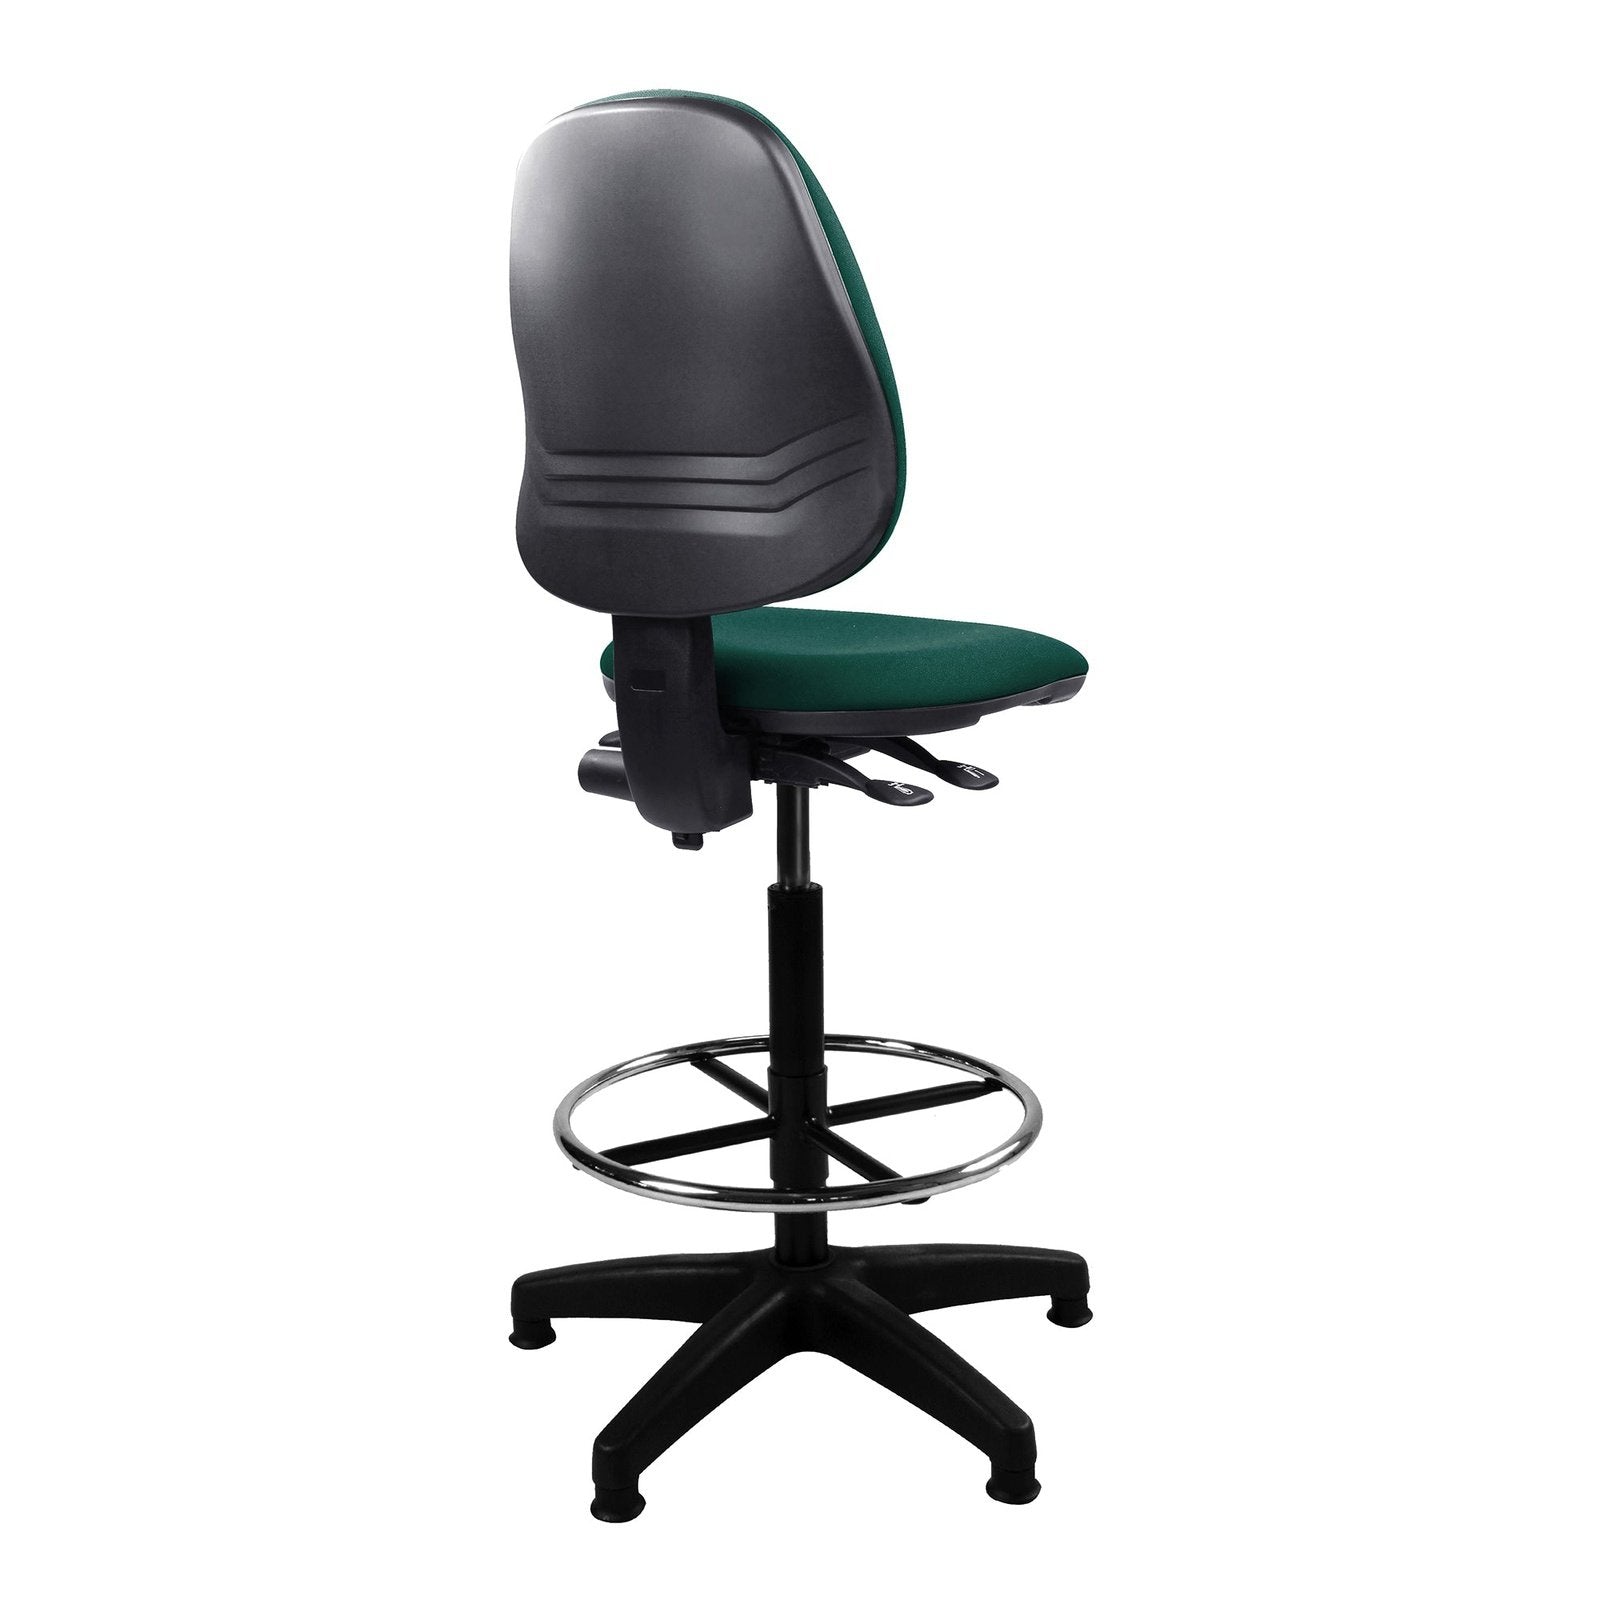 Medium Back Draughtsman Chair - Twin Lever - Office Products Online